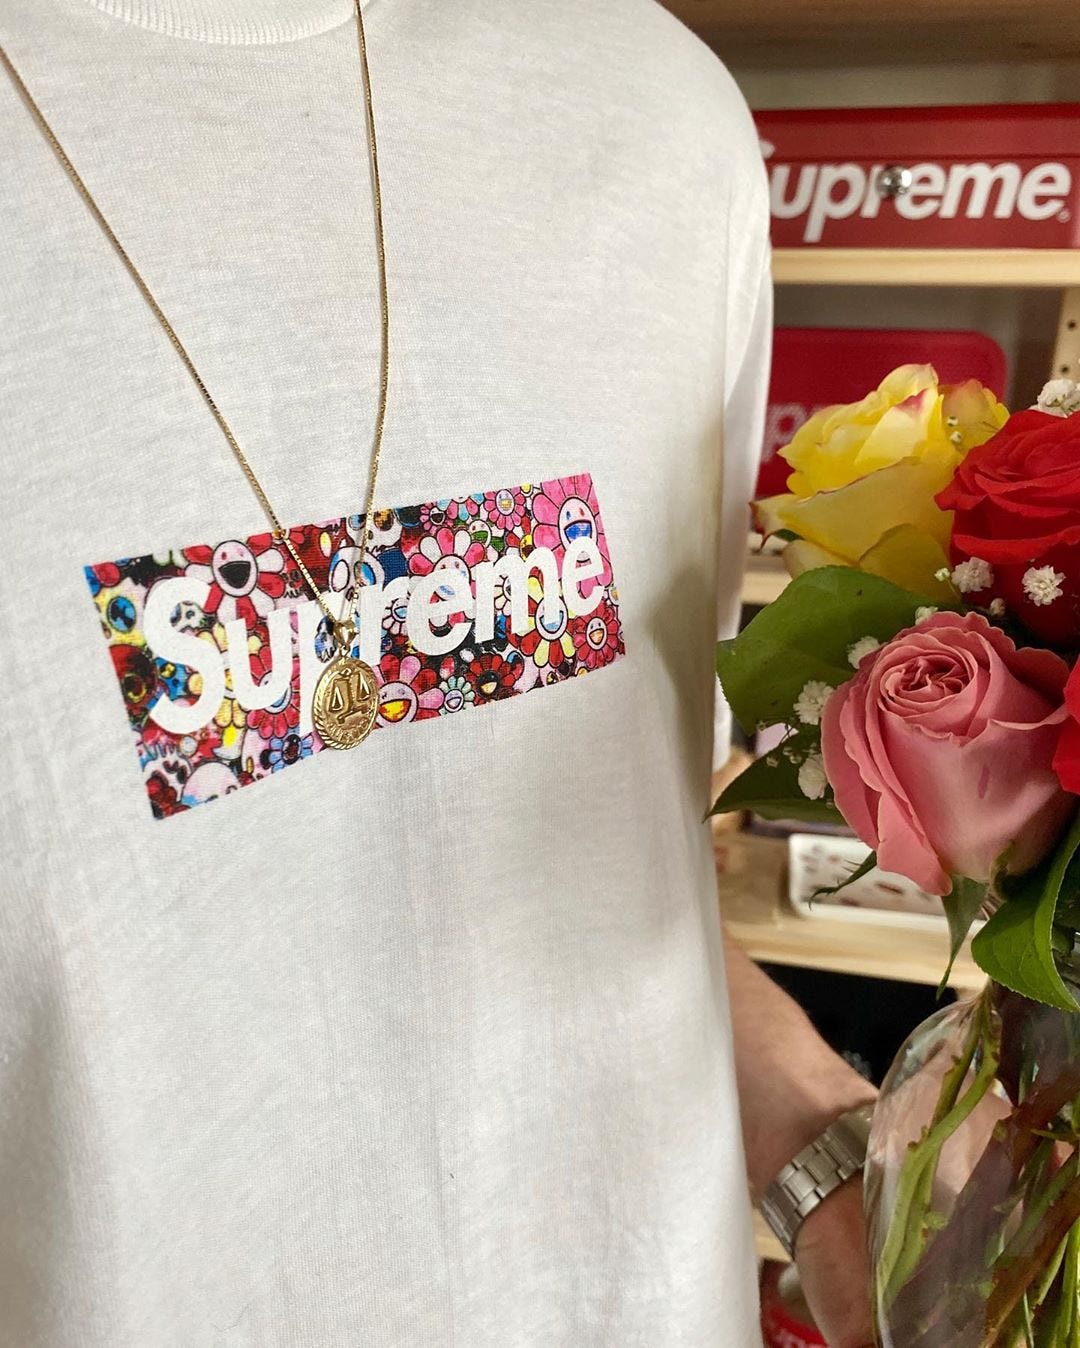 Supreme's most expensive items - The Hustle